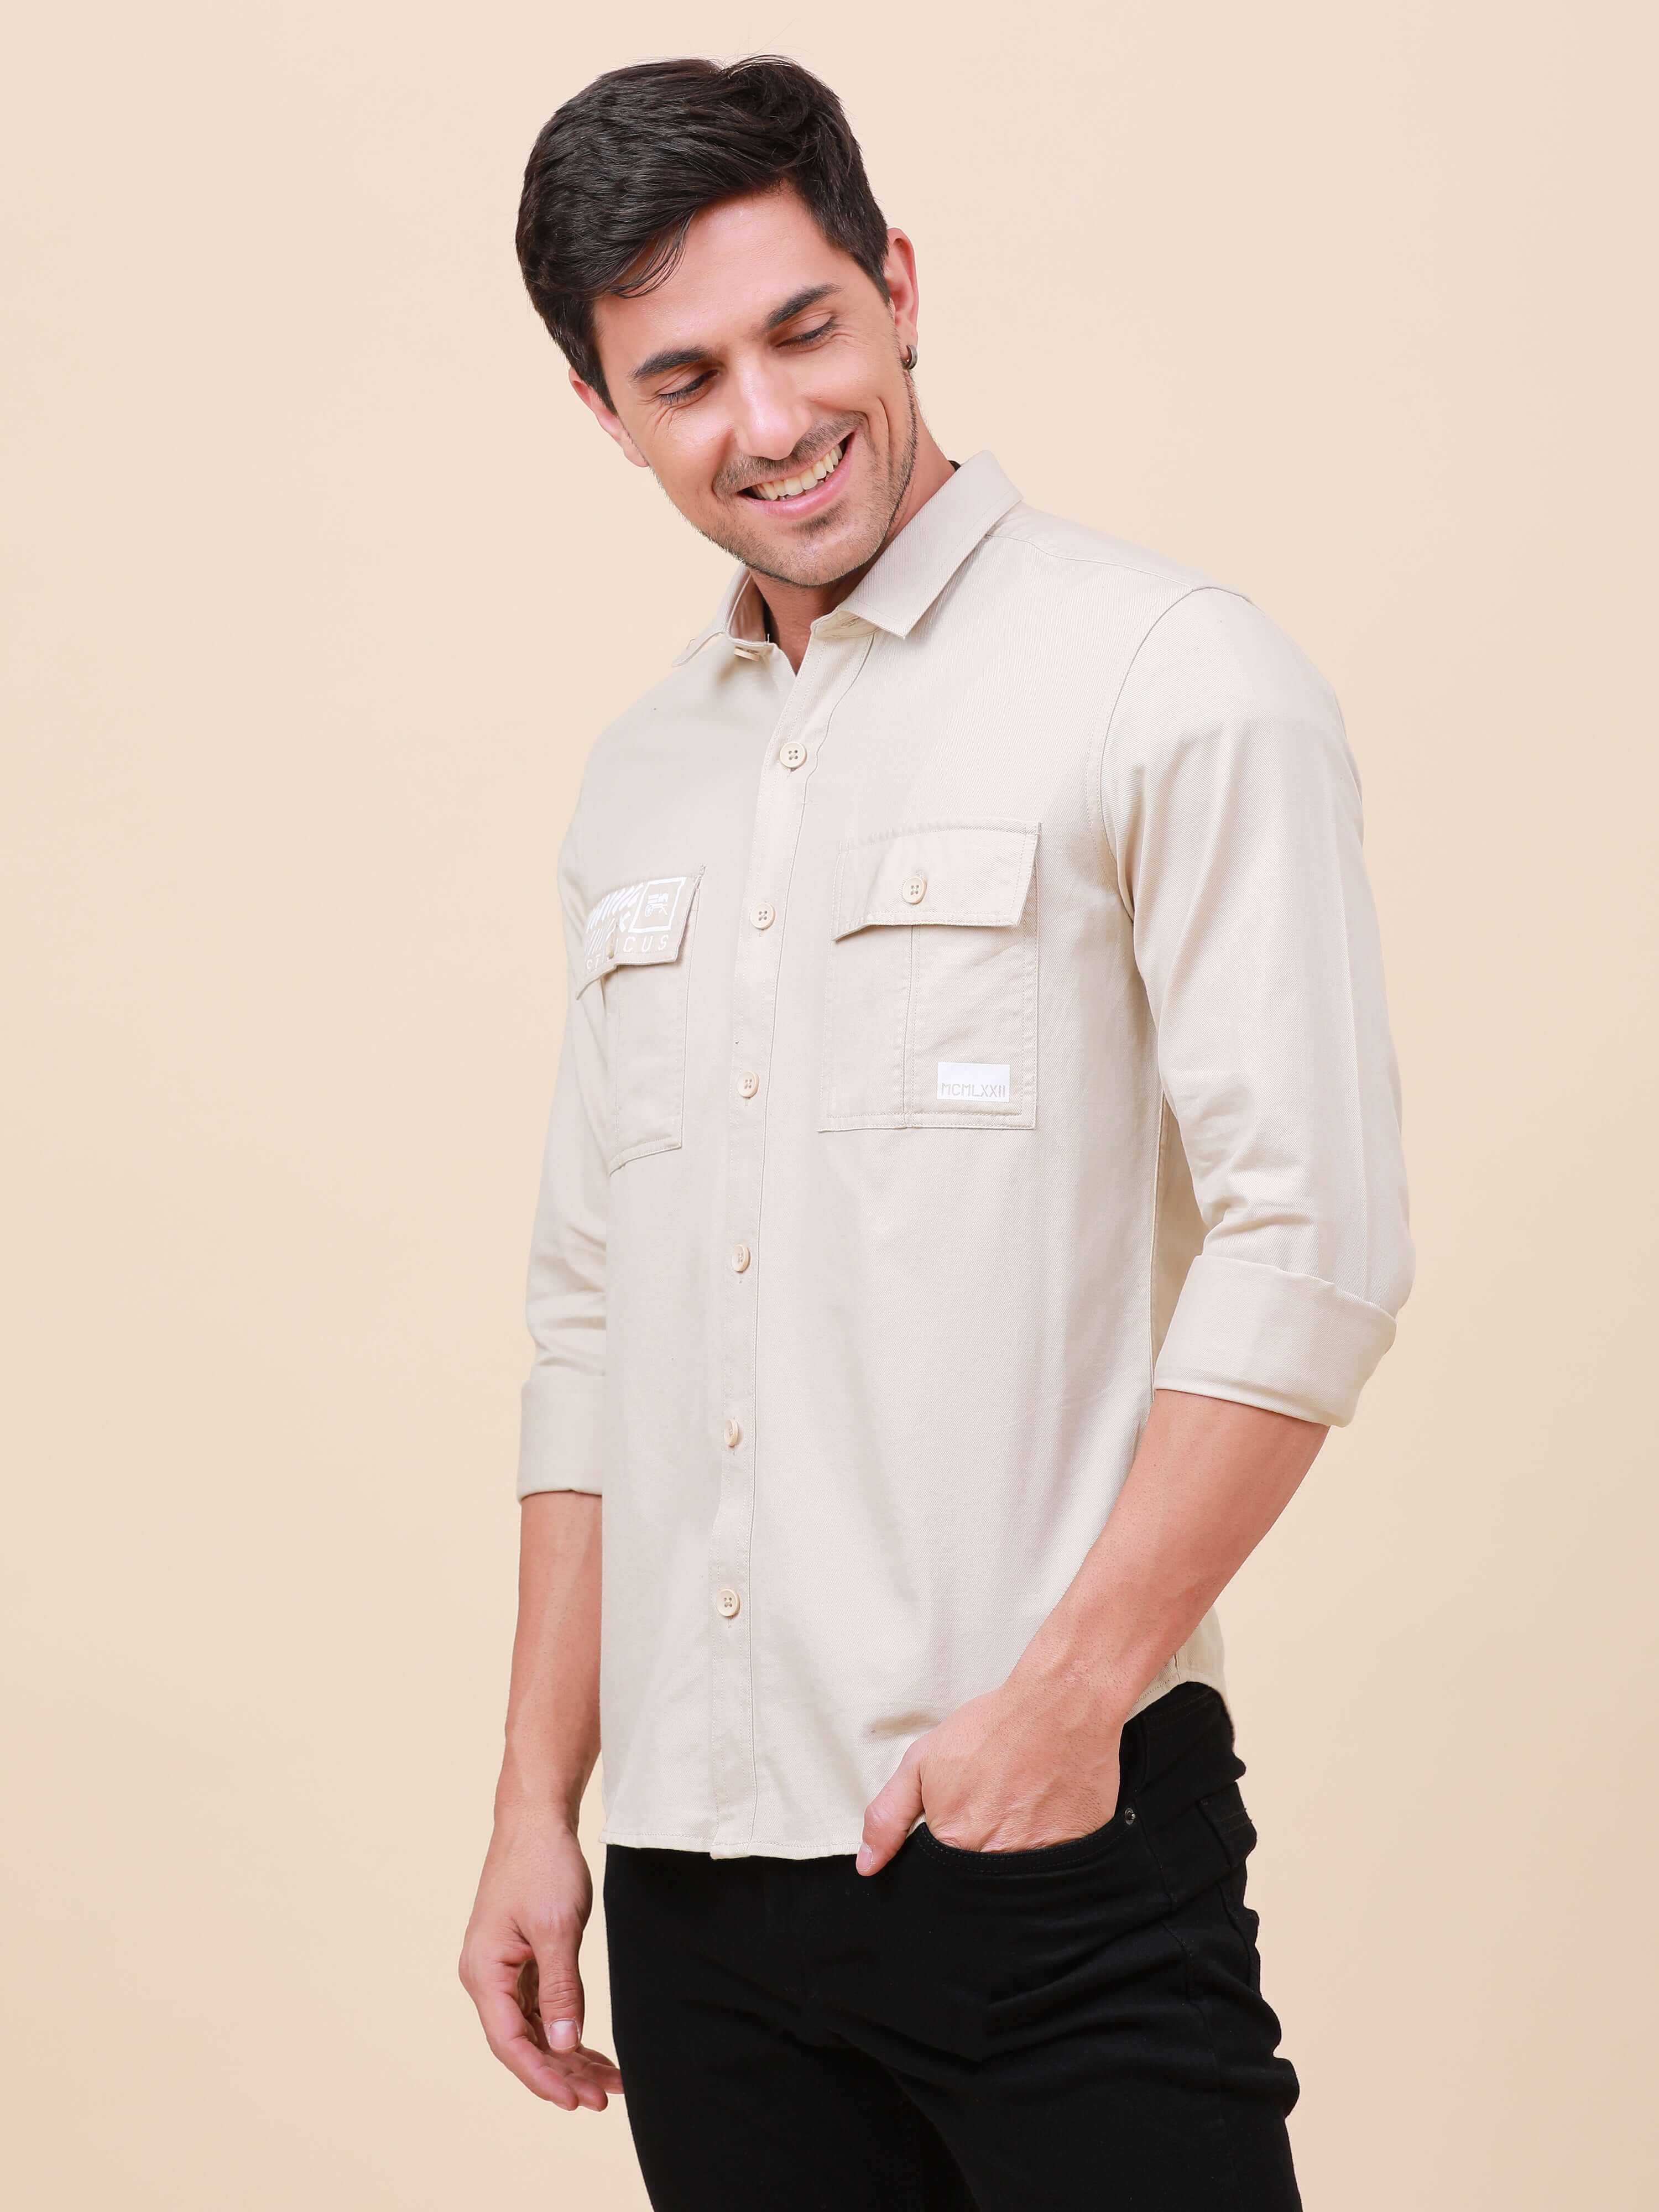 Beige Solid Double Pocket Full-Sleeve Shirt shop online at Estilocus. 100% Cotton , Full-sleeve solid shirt Cut and sew placket Regular collar Double button edge cuff Double pocket with flap Curved bottom hemline Finest printing at pocket . All double nee